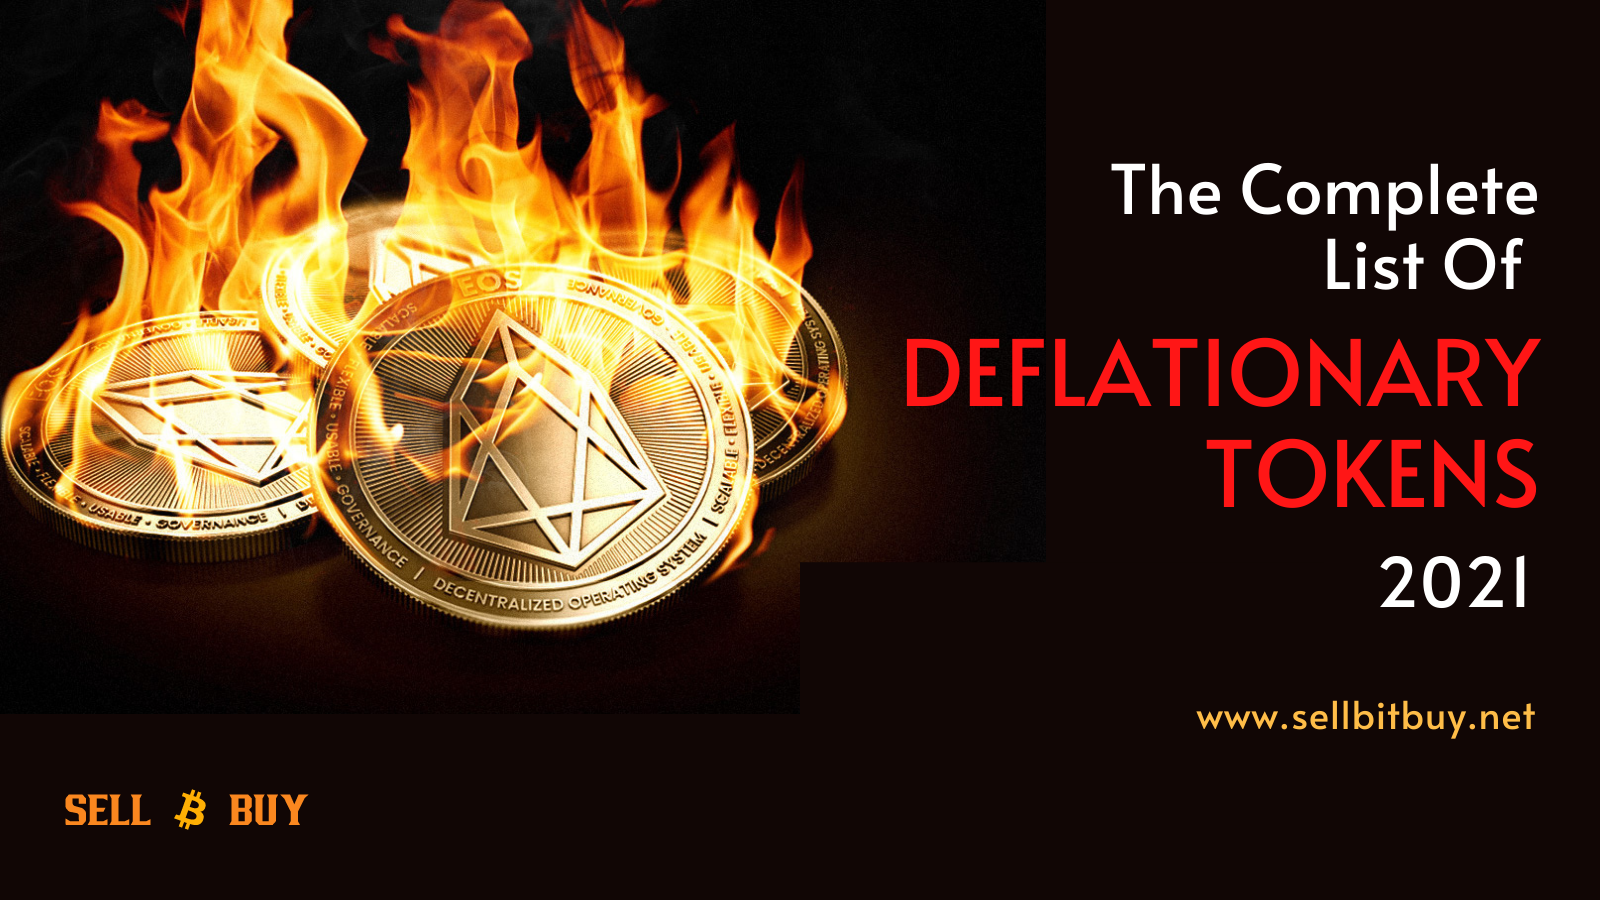 The Complete List Of Deflationary Tokens 2021